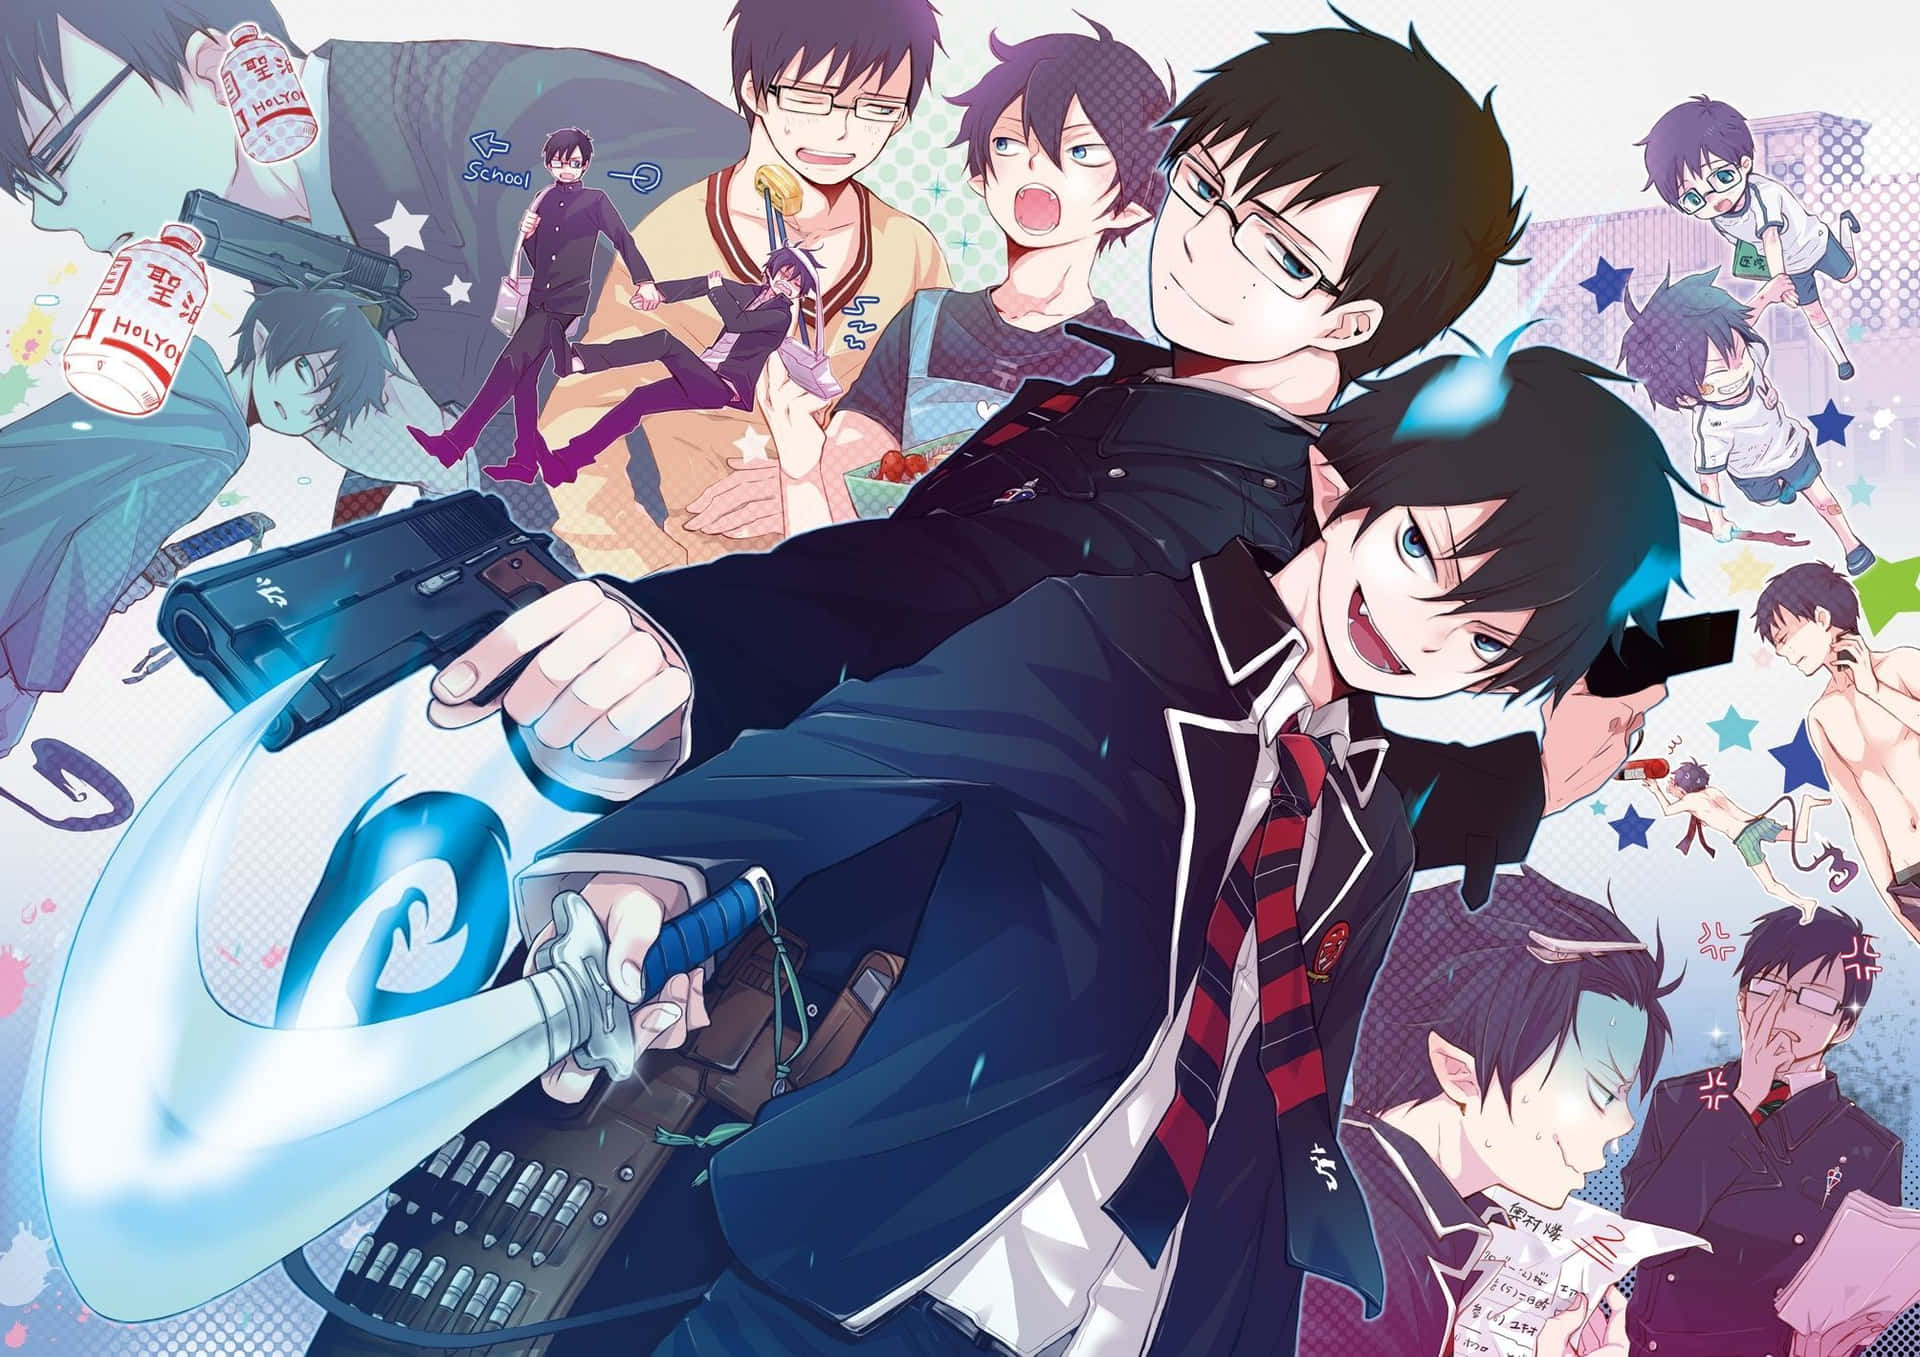 Join Rin Okumura and his friends as they journey to protect the human world from the supernatural in Blue Exorcist